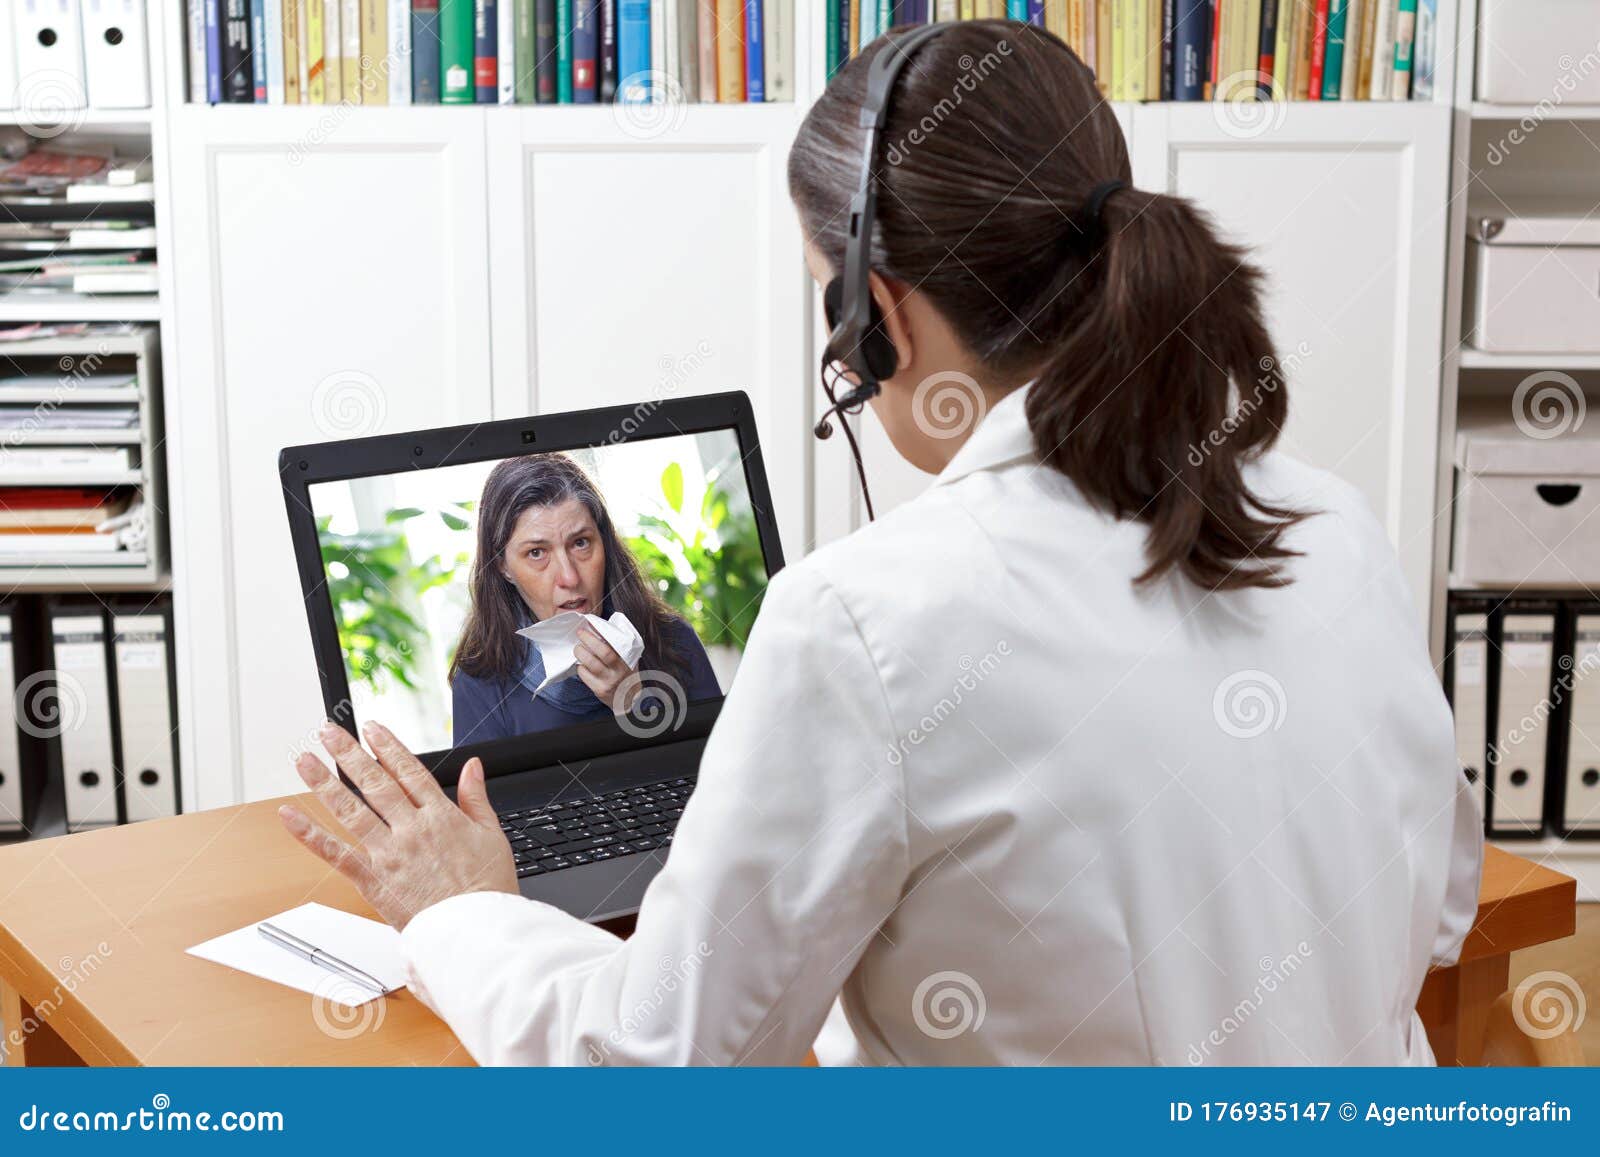 telemedicine concept: doctor during a video consult with a coughing patient.